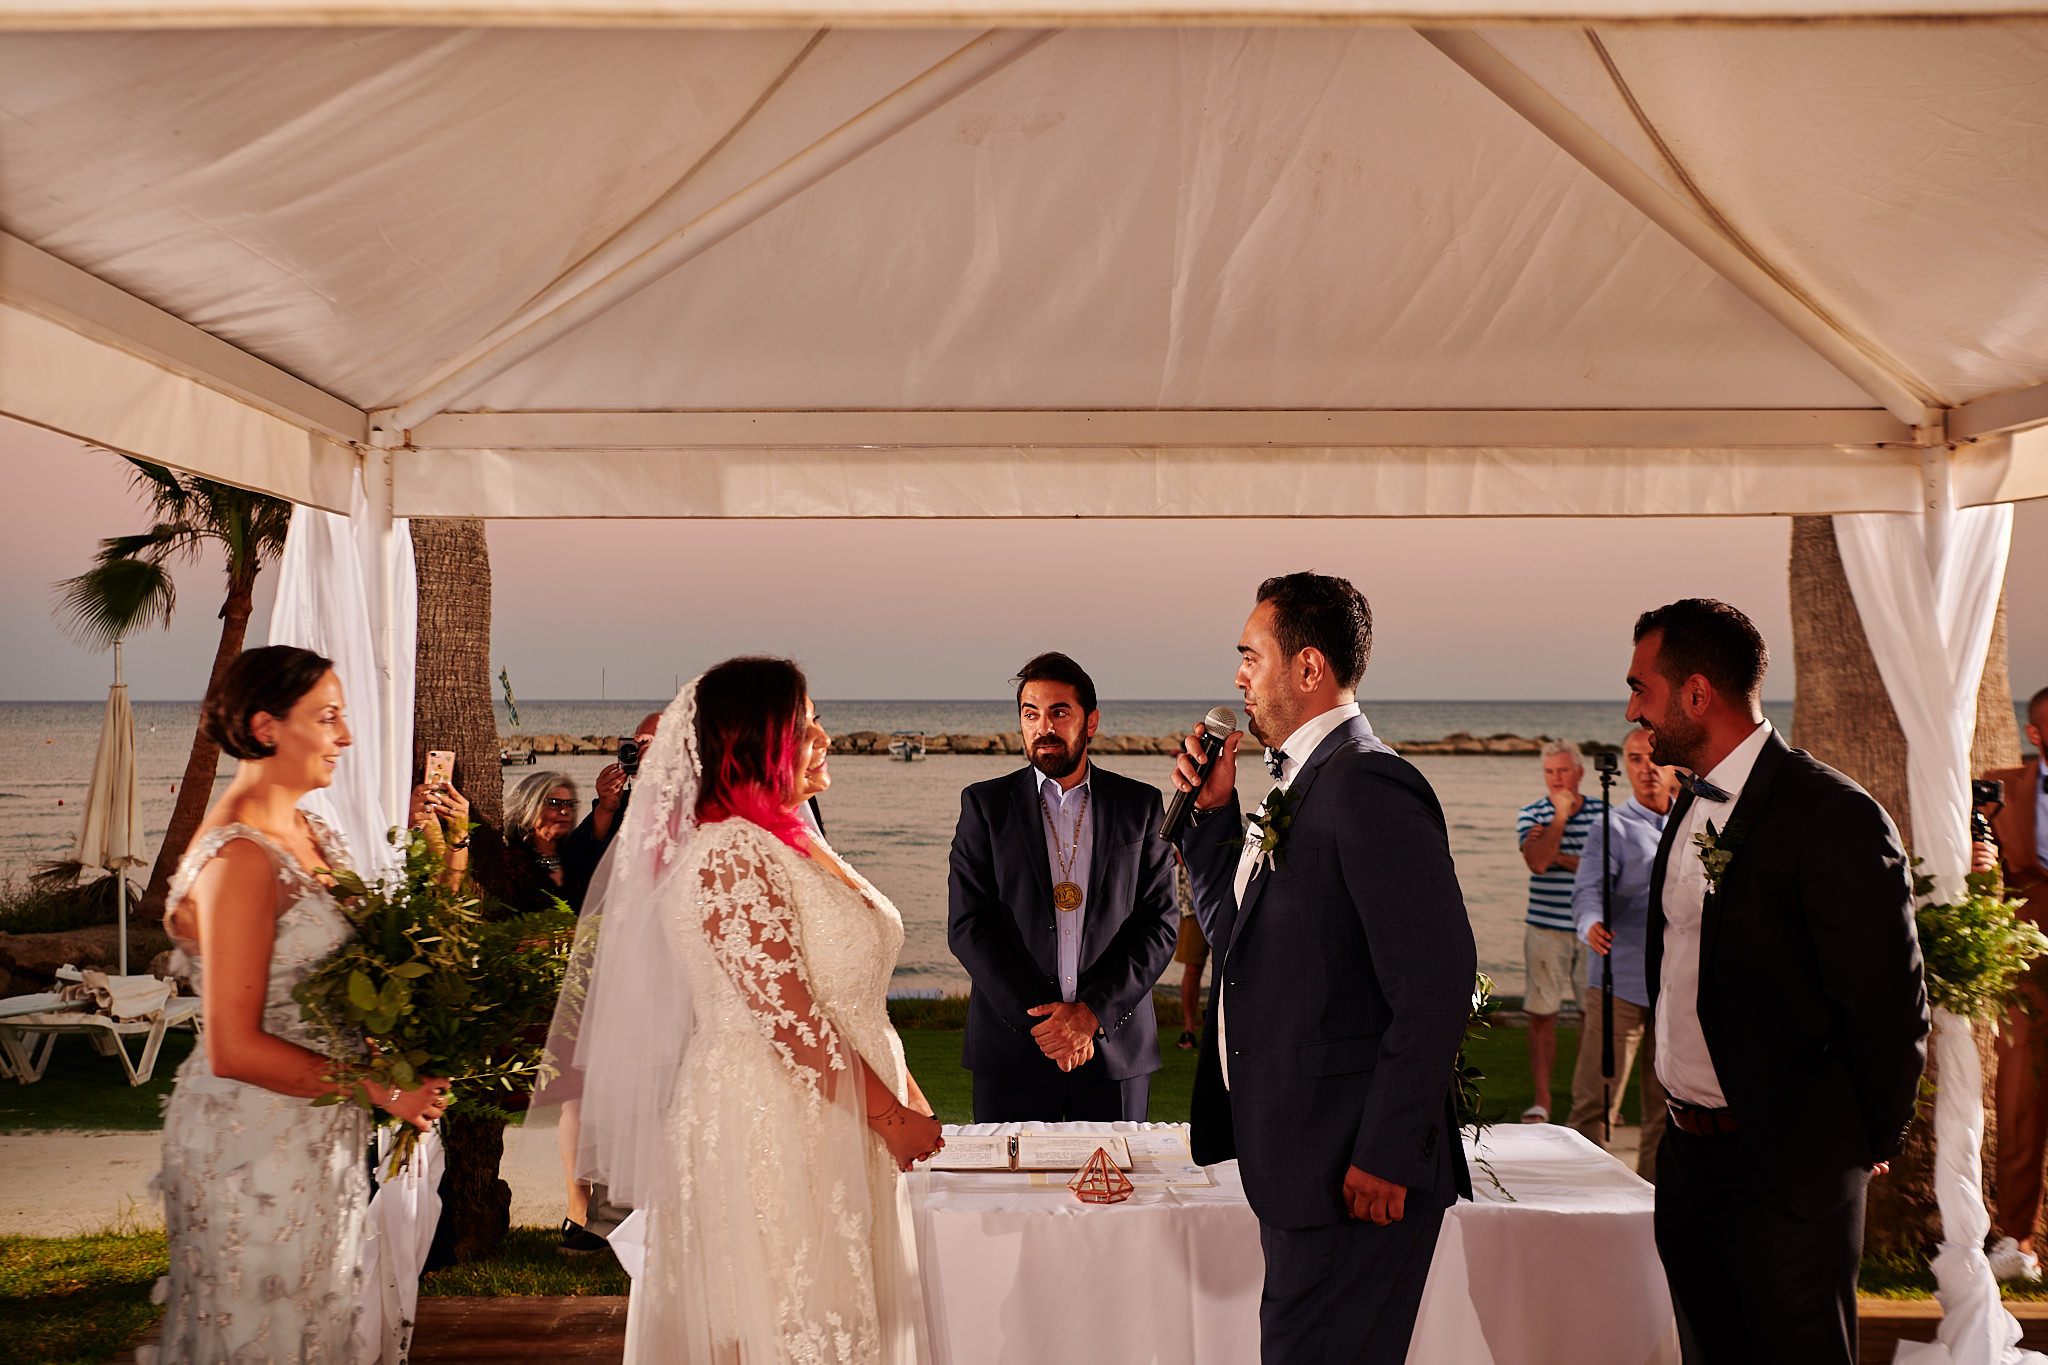 The wedding of Rima and Ibrahim, held at the Palm Beach hotel in Larnaca, Cyprus  - by International destination wedding photographer -  Richard King  A wedding full of Lebaneese charm themed around olive trees.